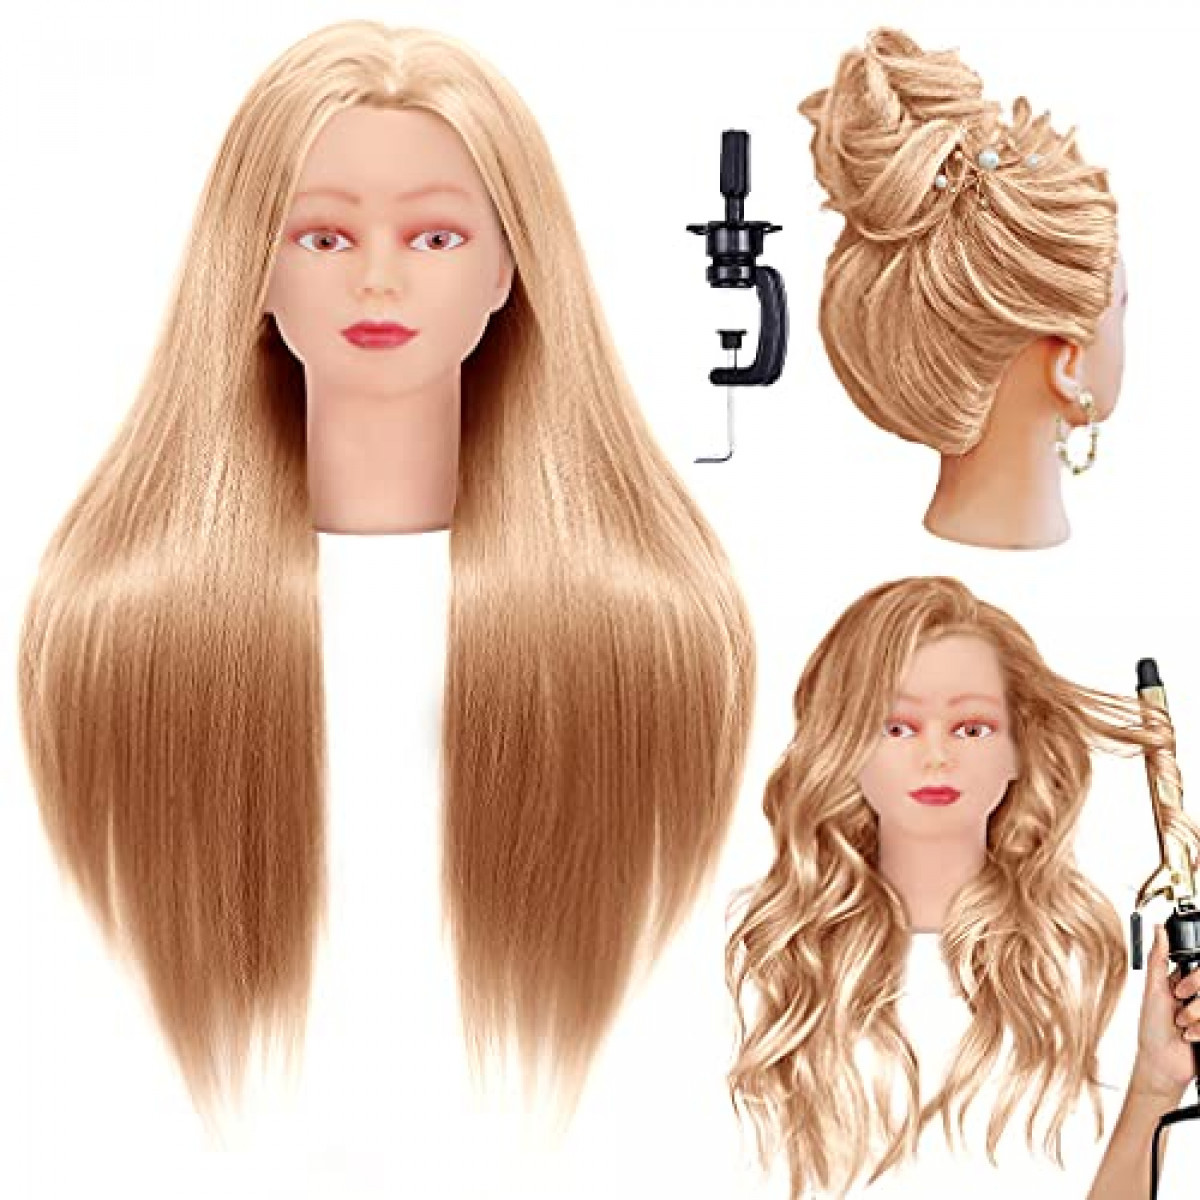 Cosmetology Mannequin Head With Synthetic Hair And Adjustable Stand 26-28 Blonde For Braiding Hair Styling Training Hairart Hairdressing Salon